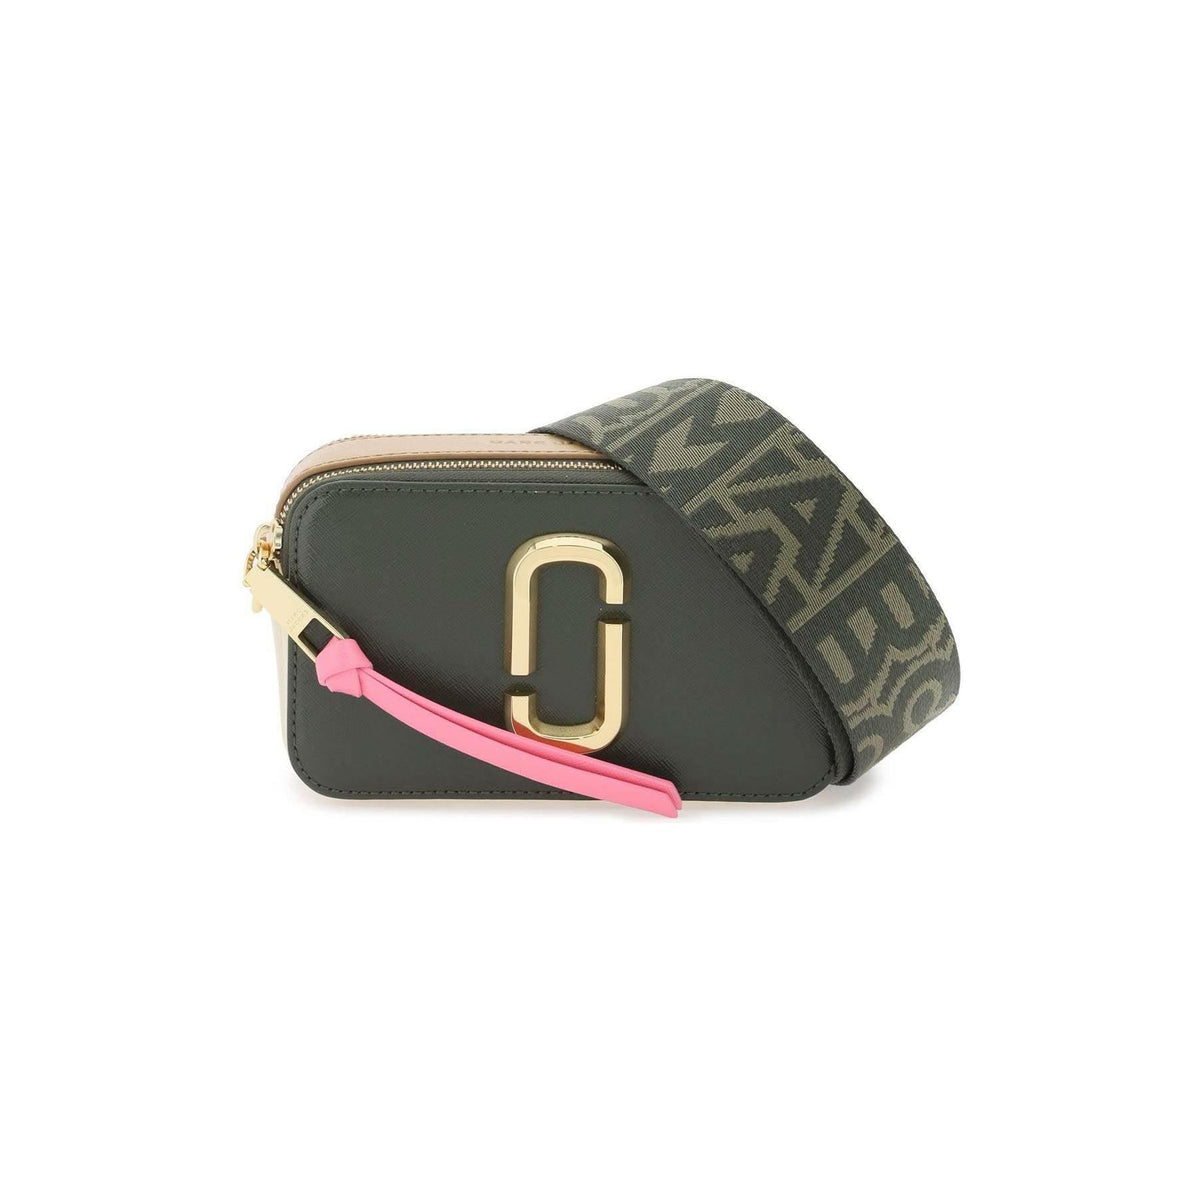 MARC JACOBS - Forest Green and Pink Multi The Snapshot Camera Bag - JOHN JULIA